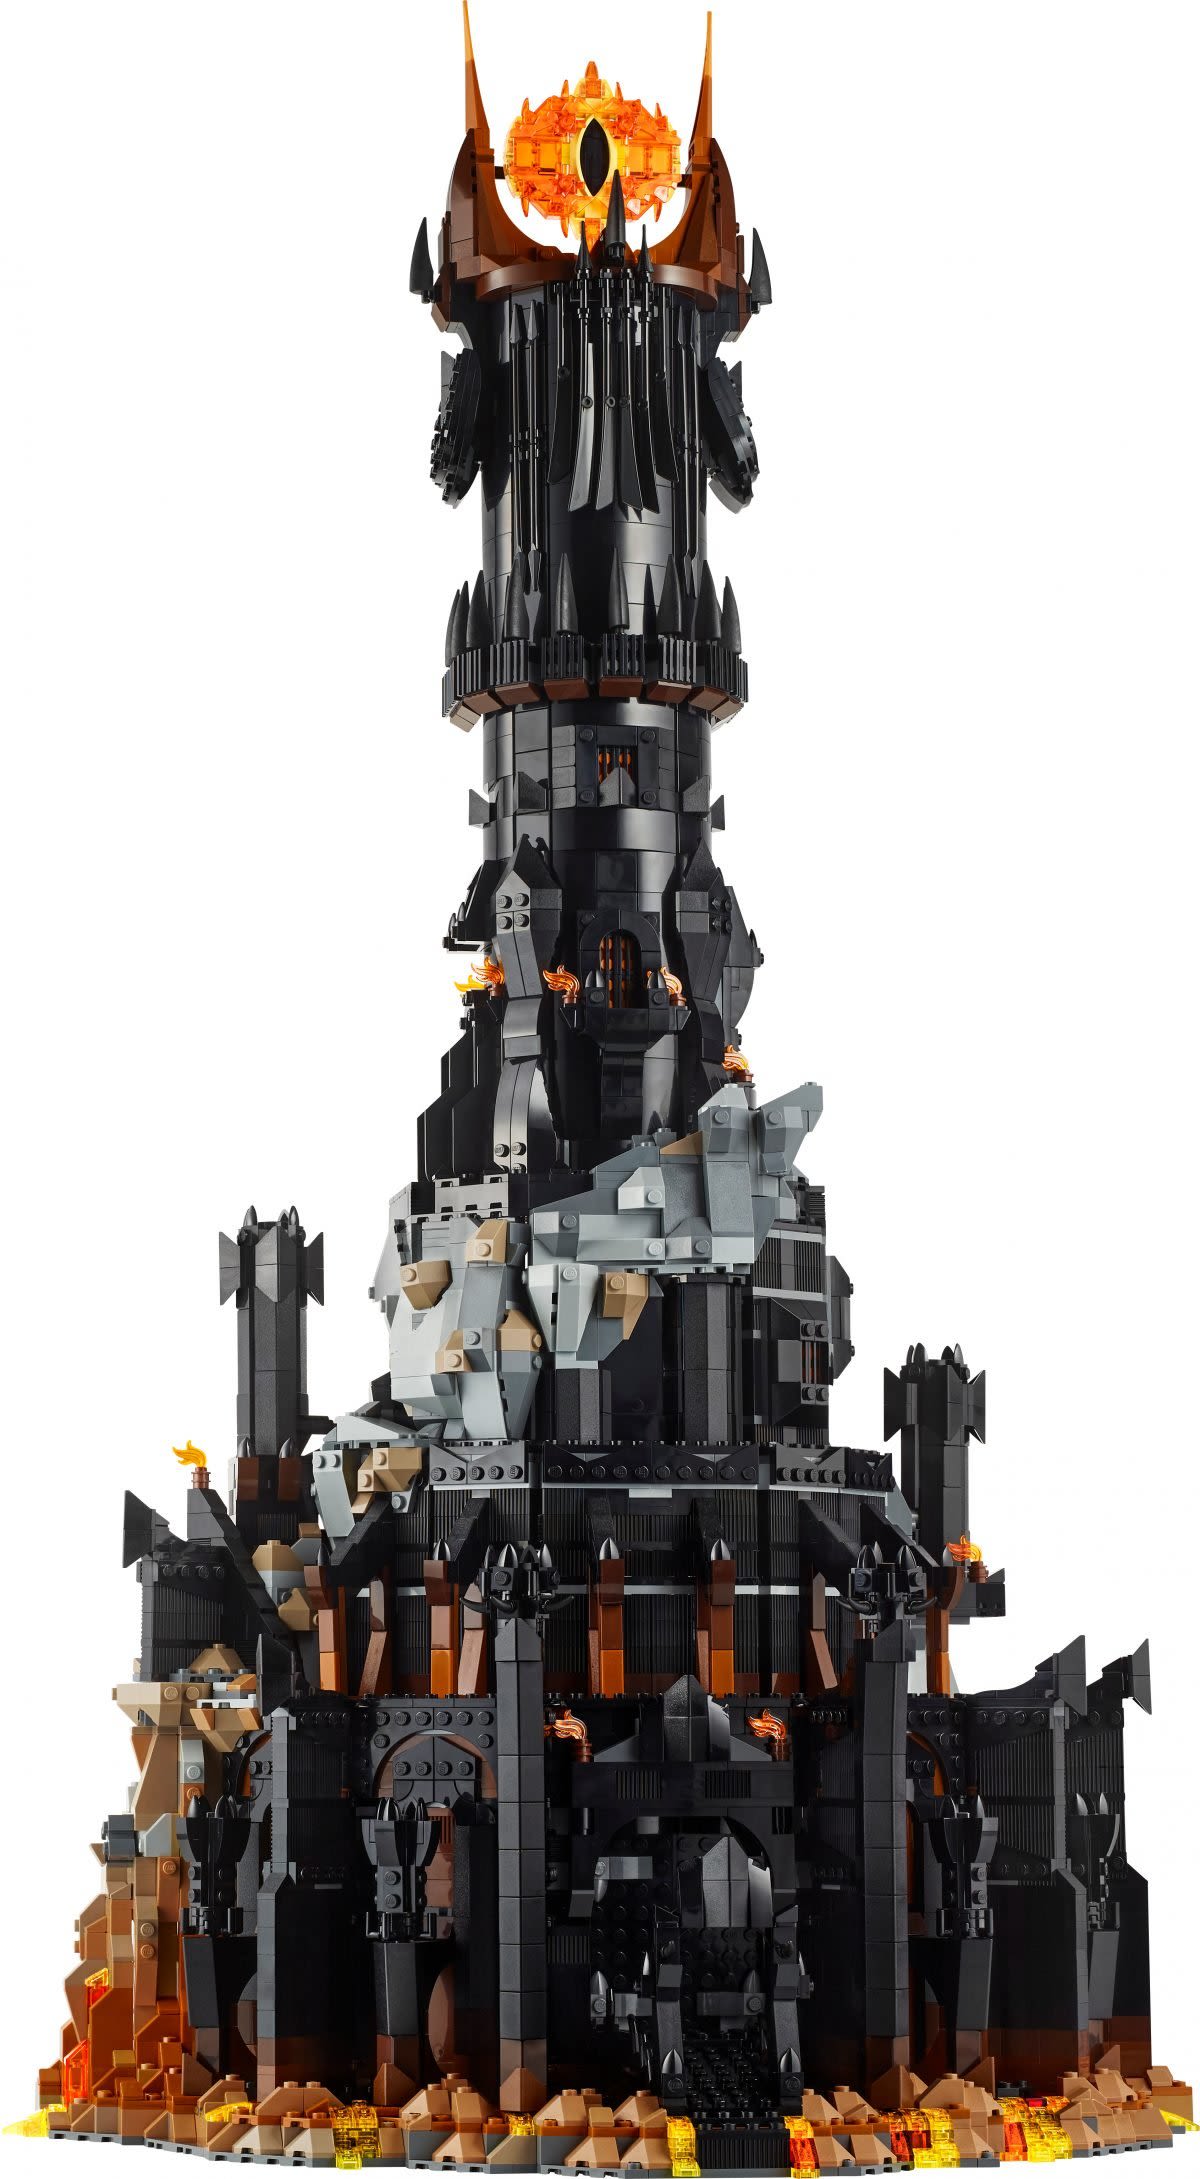 LEGO’s New LORD OF THE RINGS: BARAD-DÛR Set Invites You on a Journey to Mount Doom